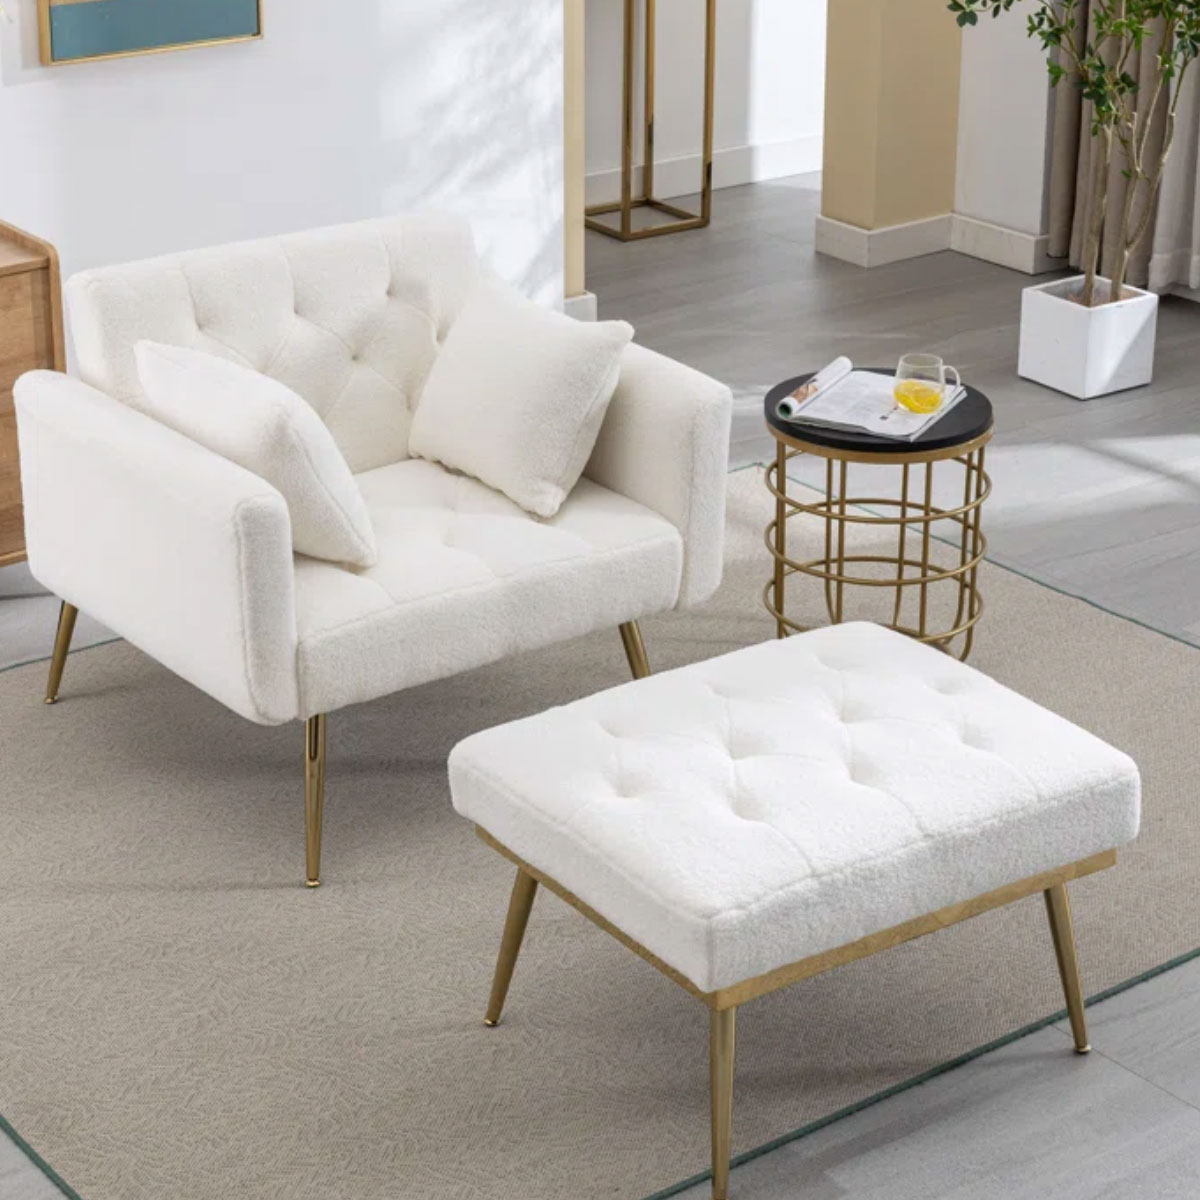 Wayfair’s Anniversary Sale Is Here: 70% Off Deals You Must See